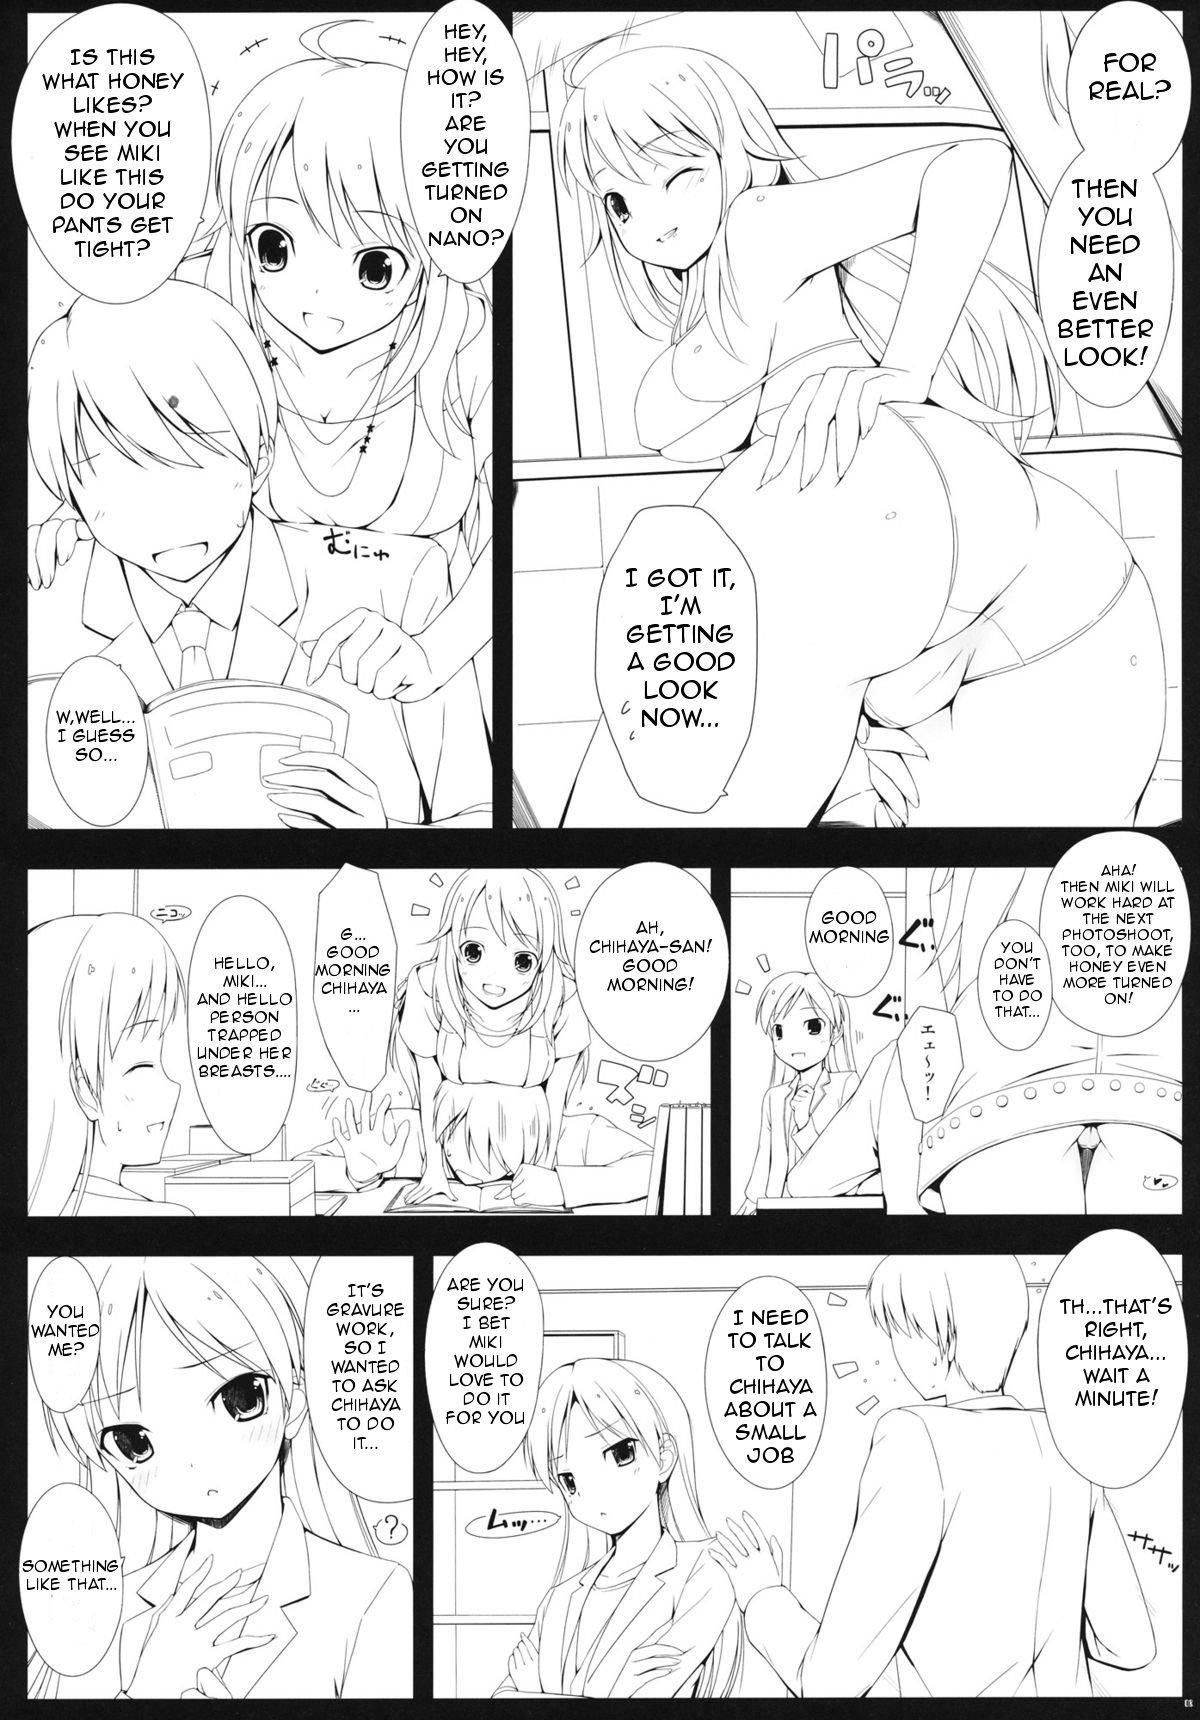 Hot Whores BAD COMMUNICATION? 13 - The idolmaster Amateur Porn - Page 5